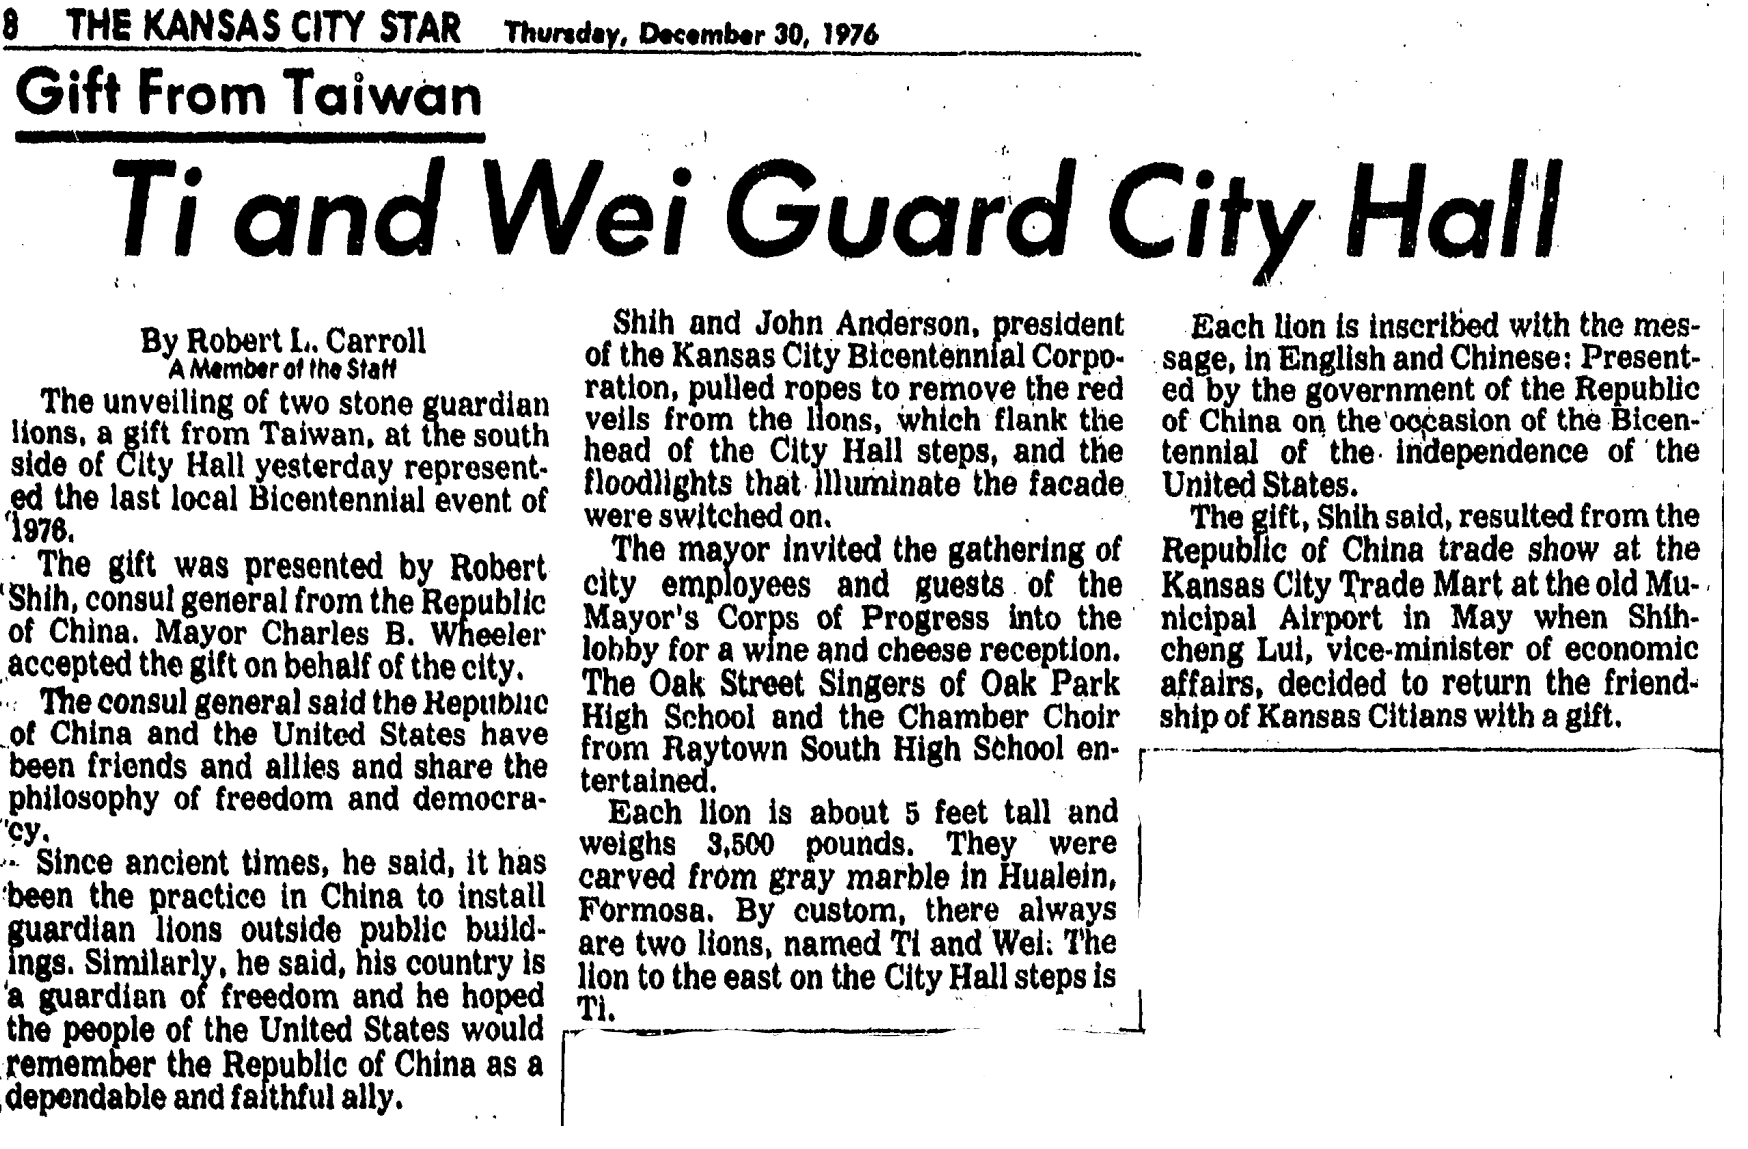 An image of the Kansas City Star article that details the dedication of the two lion statues that were gifts from the Republic of China (Taiwan) to commemorate the U.S. Bicentennial in December of 1976.